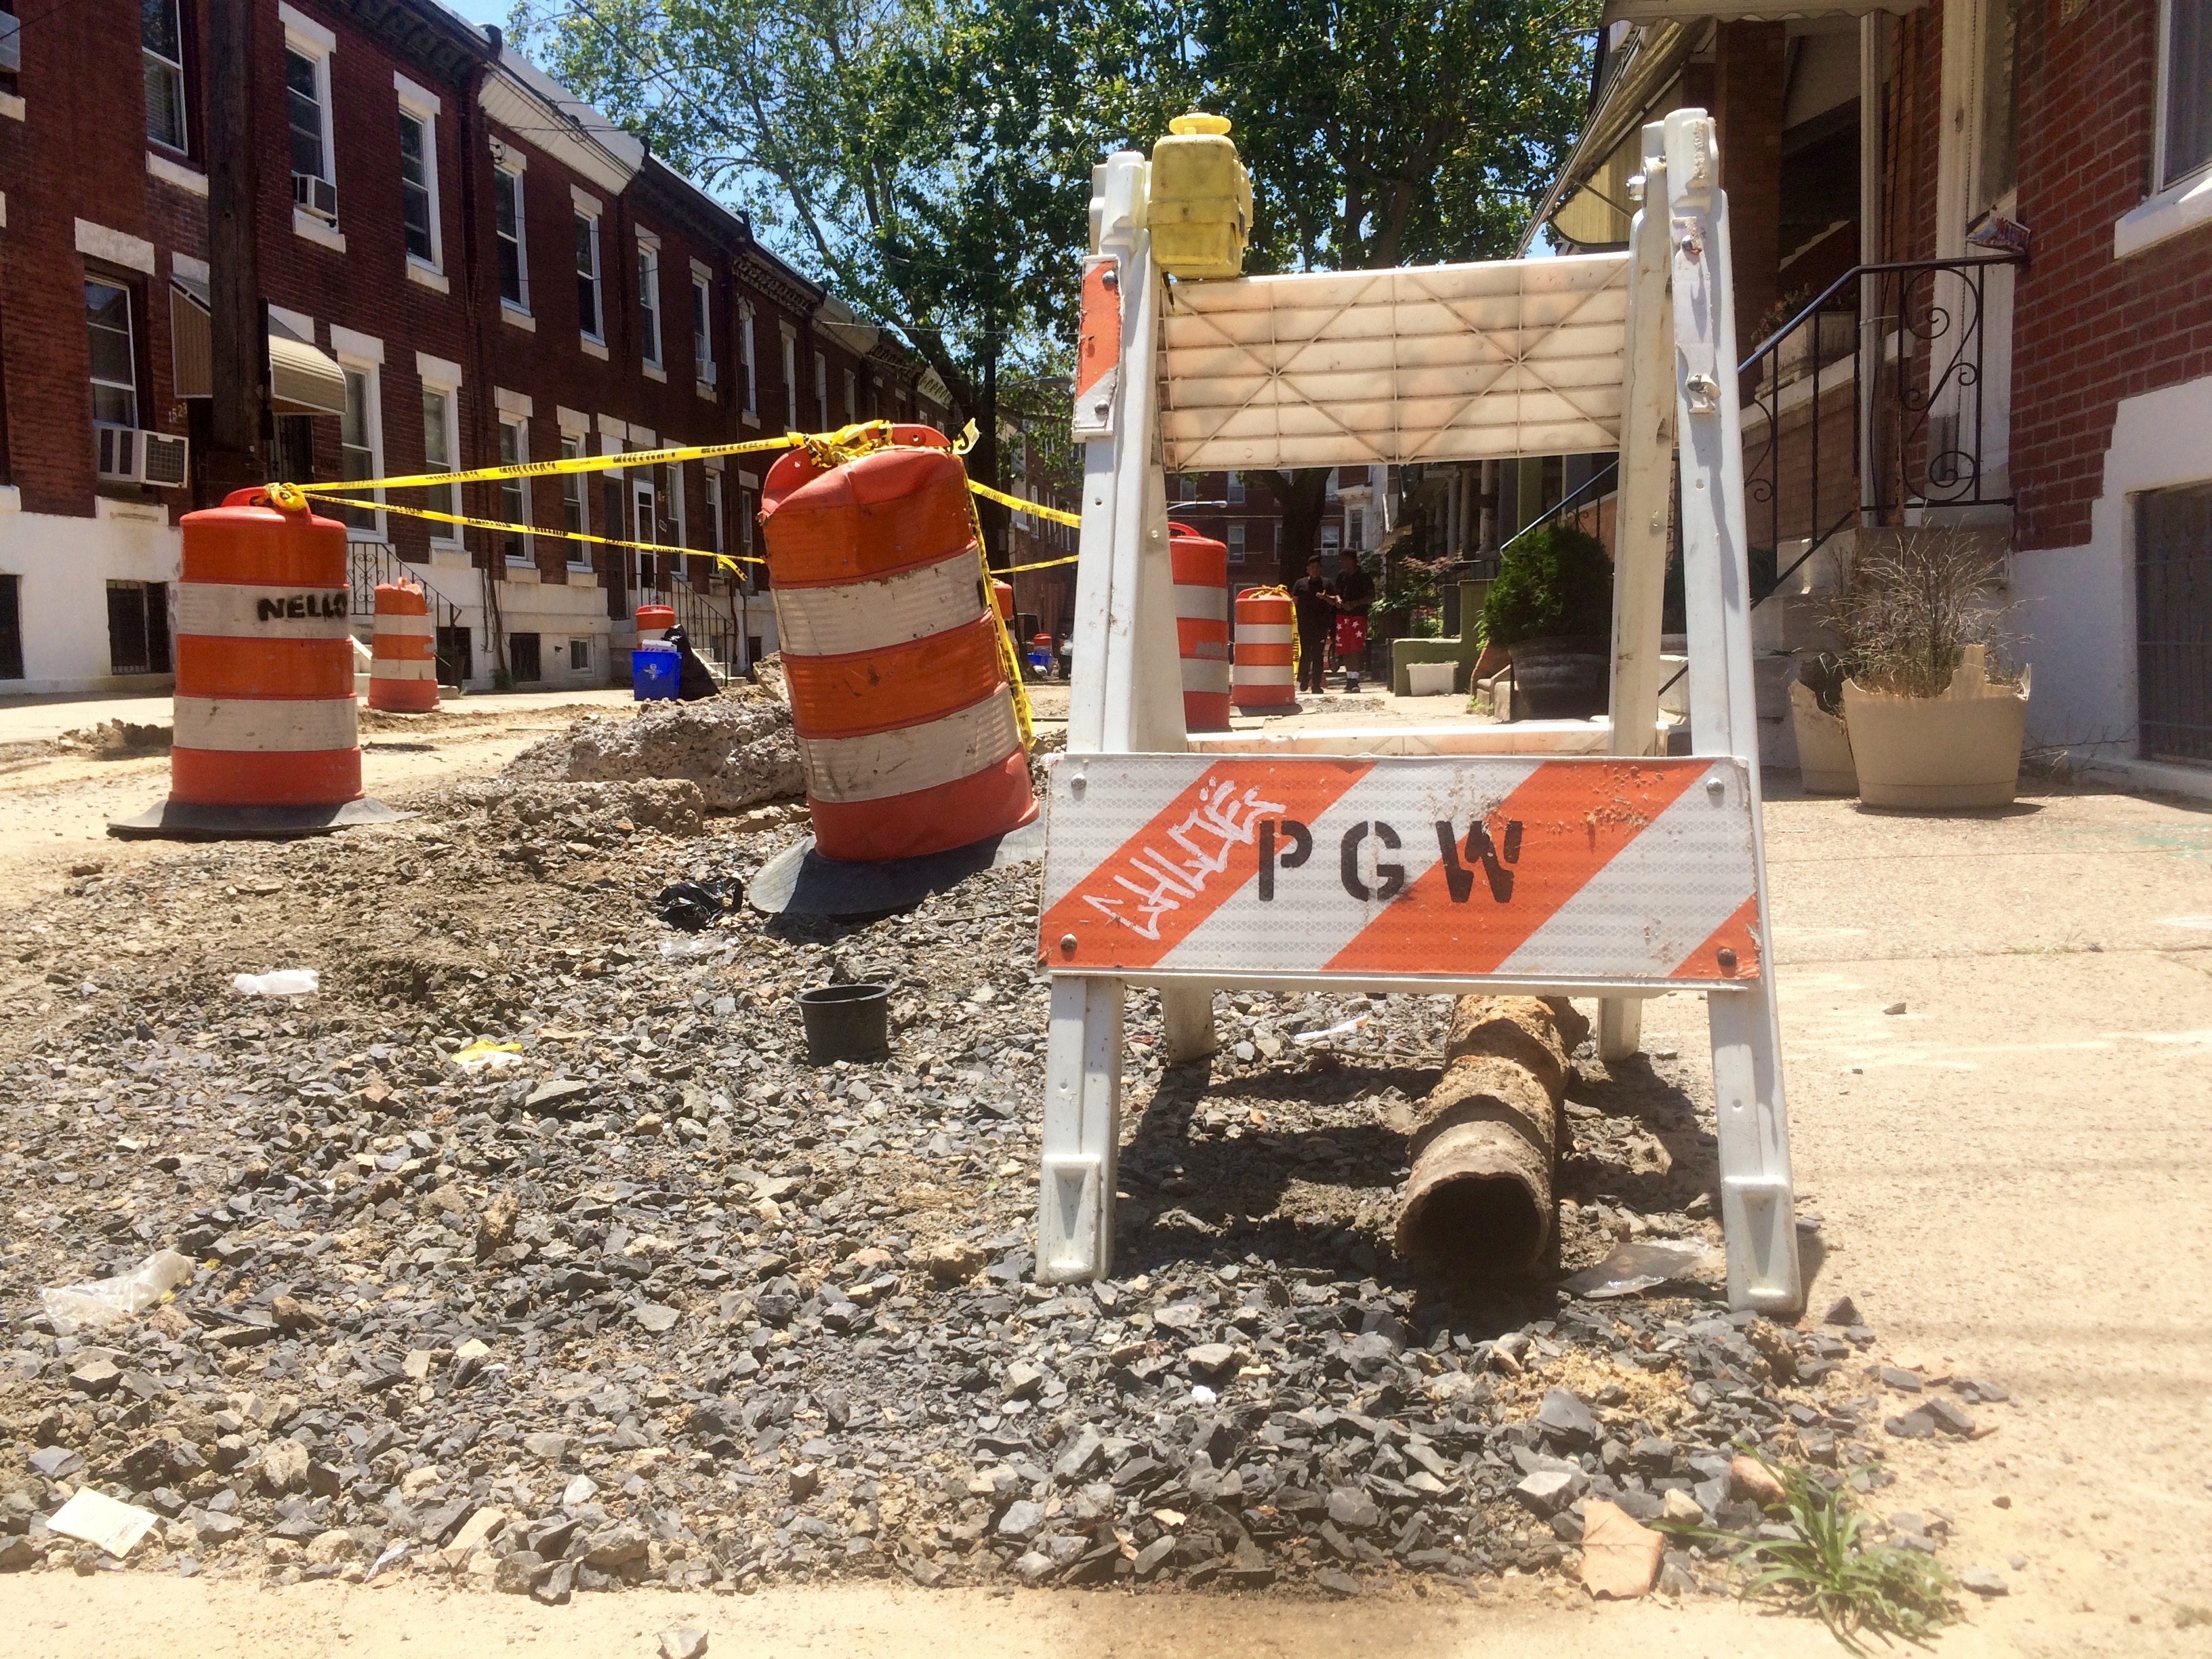 Water main replacement at S. Carlisle St. in South Philadelphia